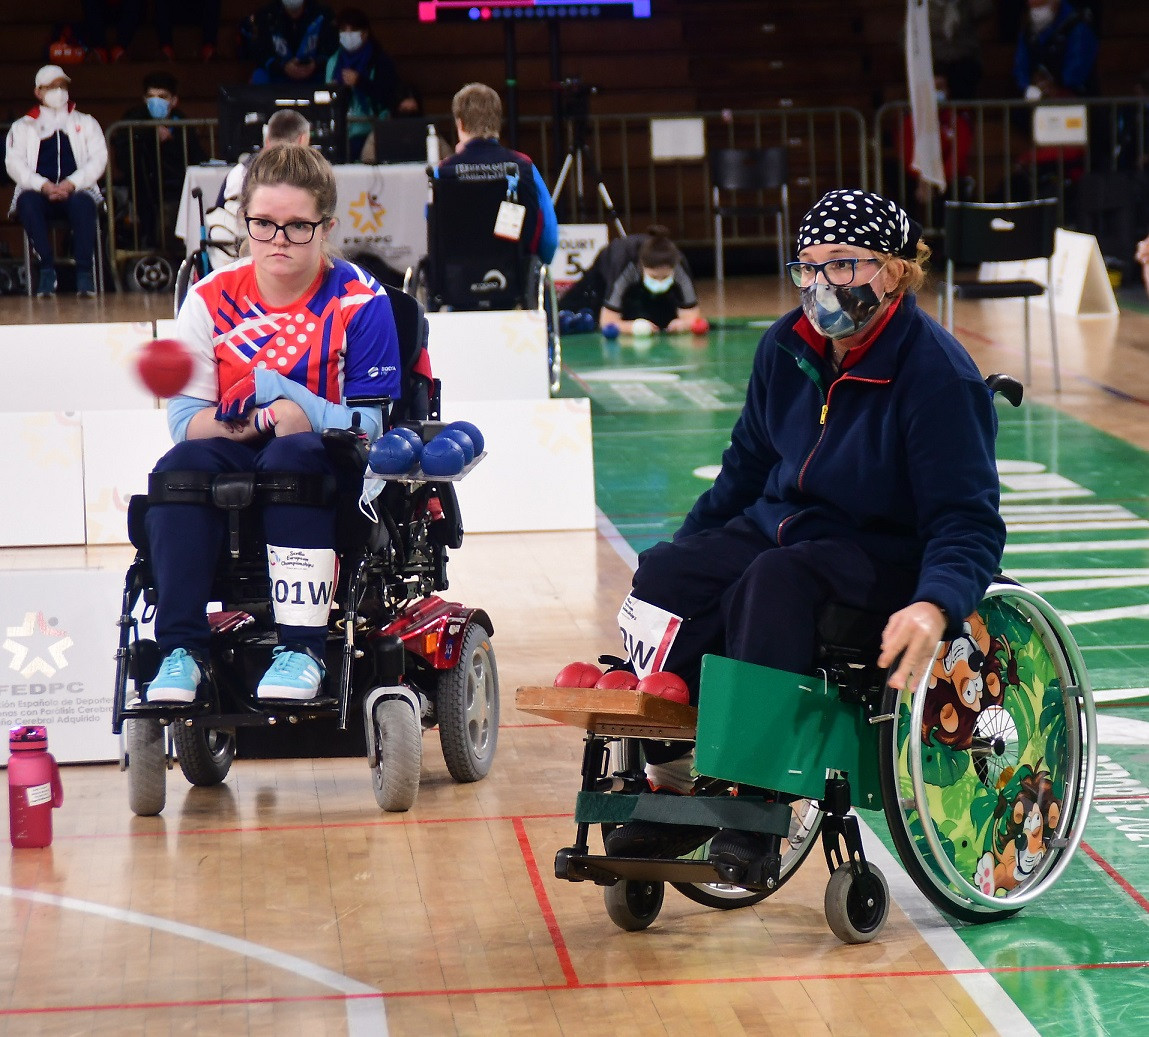 The event in Sevilla concluded with team events after the end of individual competitions ©World Boccia